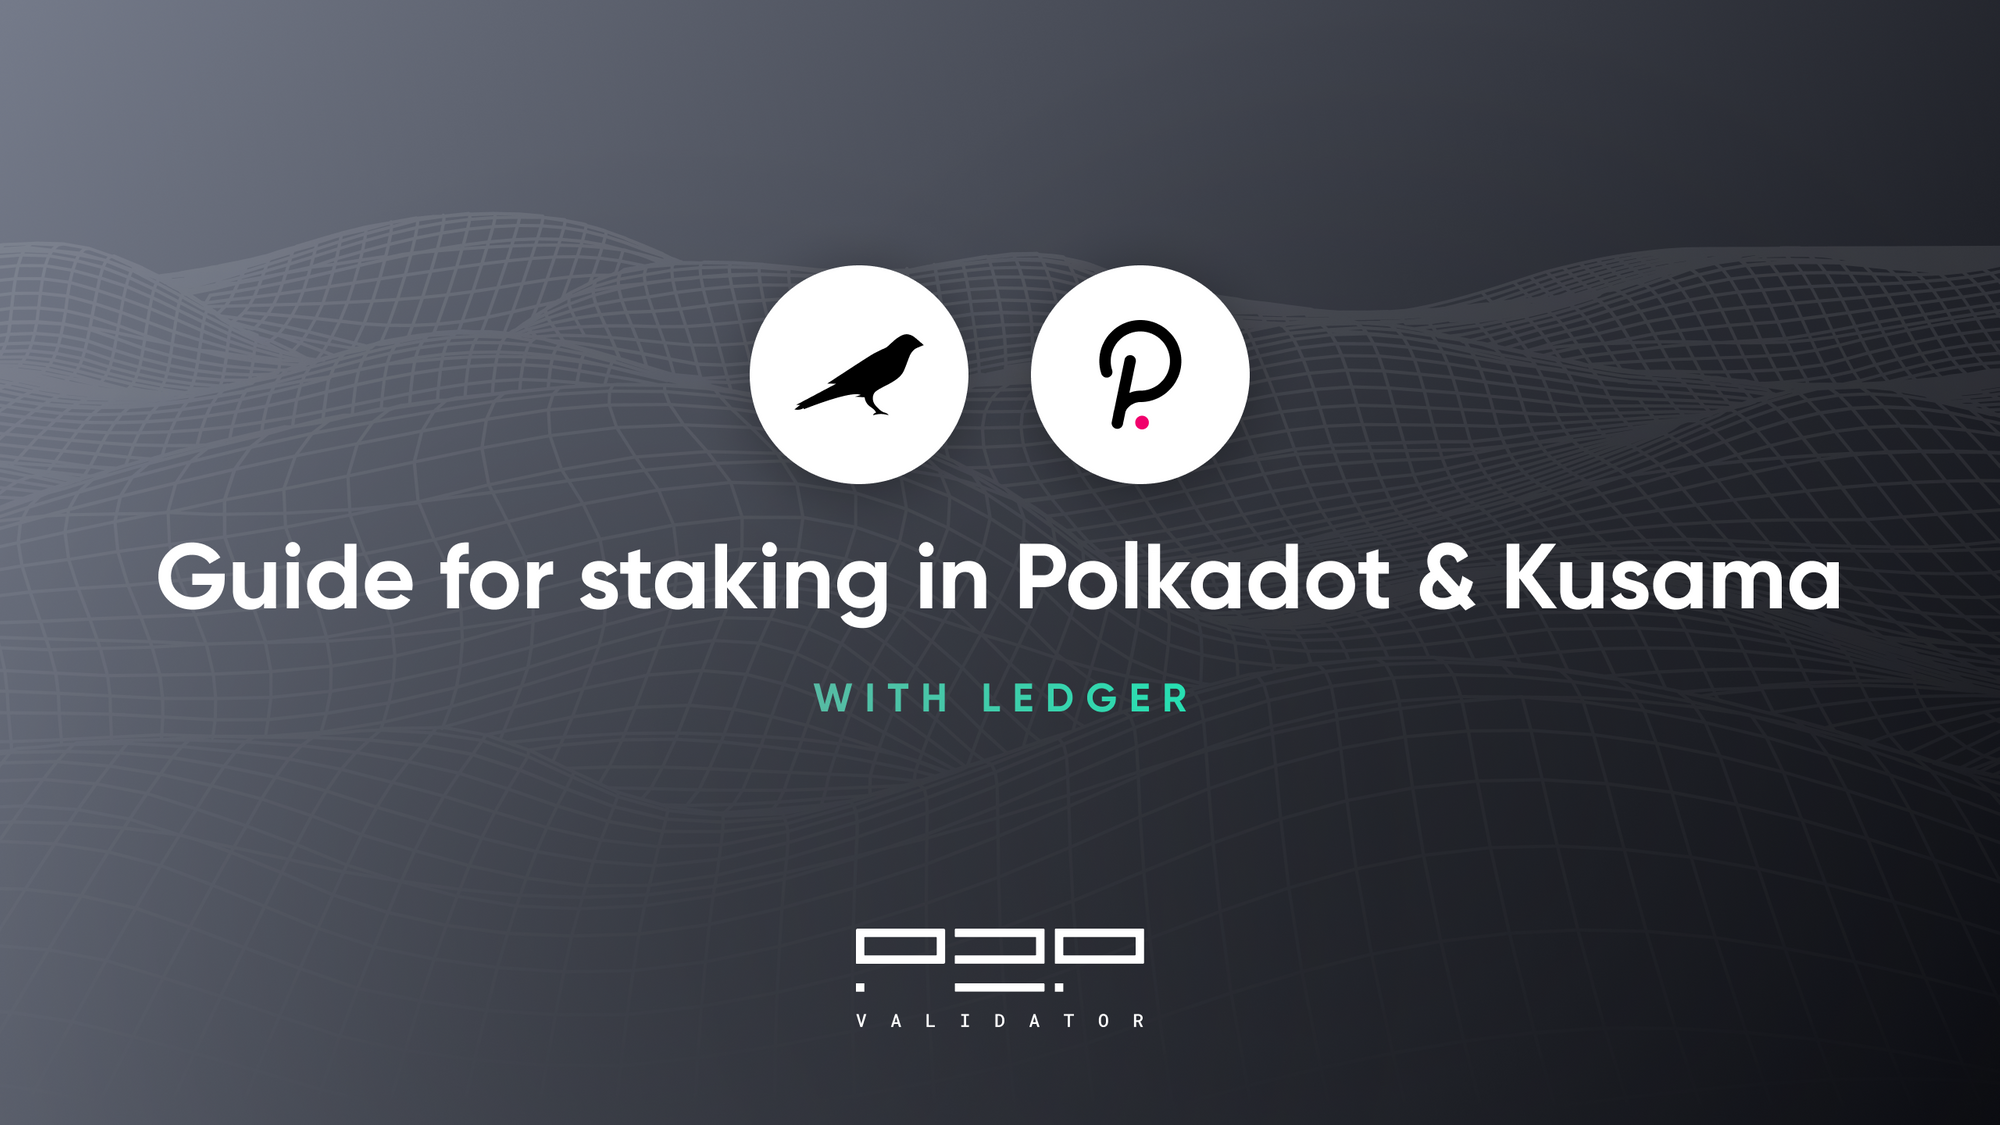 Guide for staking in Polkadot & Kusama with Ledger